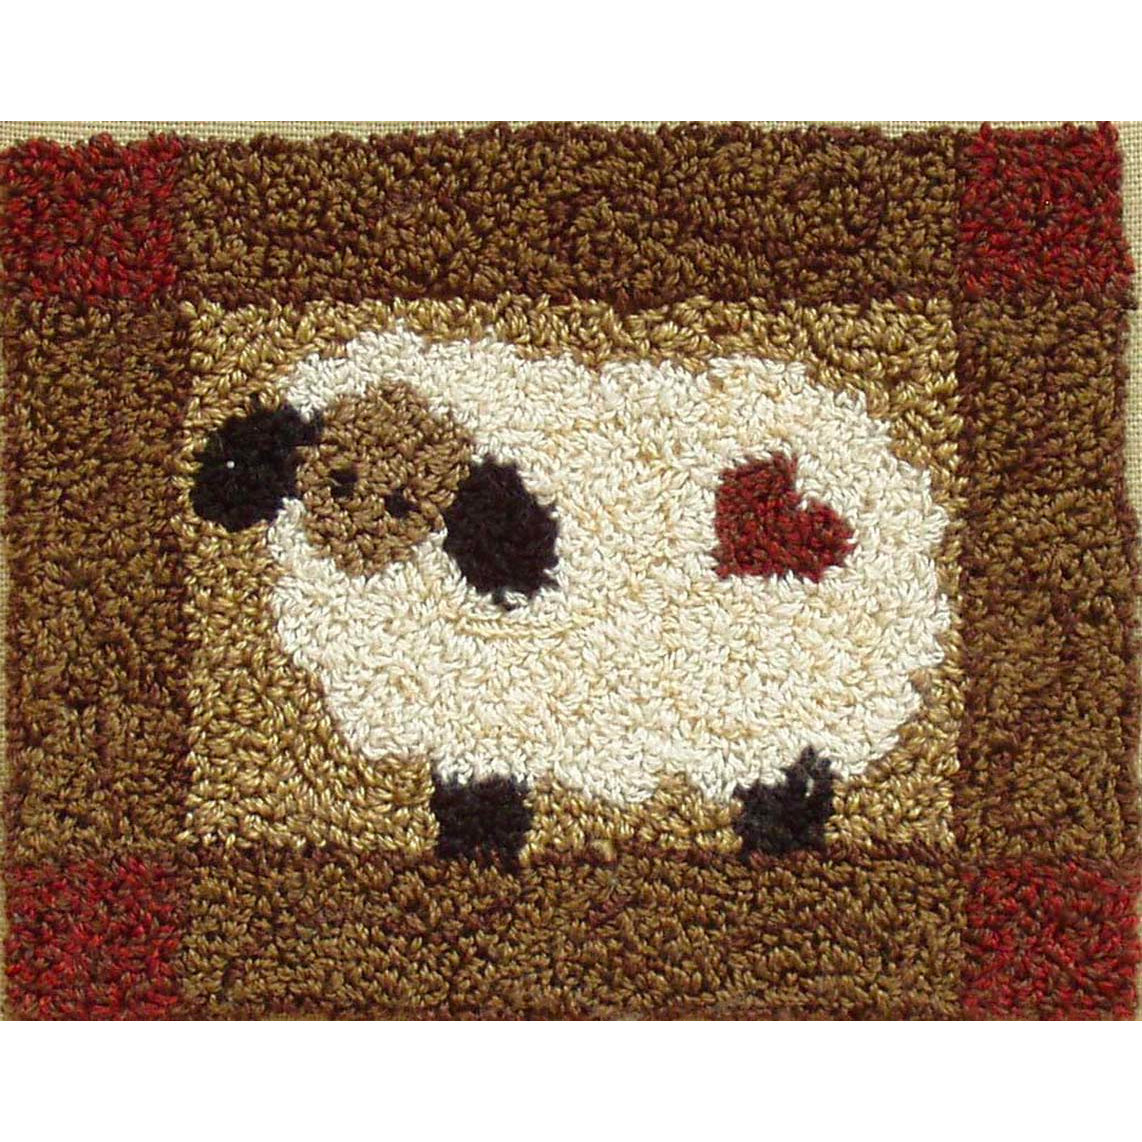 Sheep Punch Needle Embroidery Kit